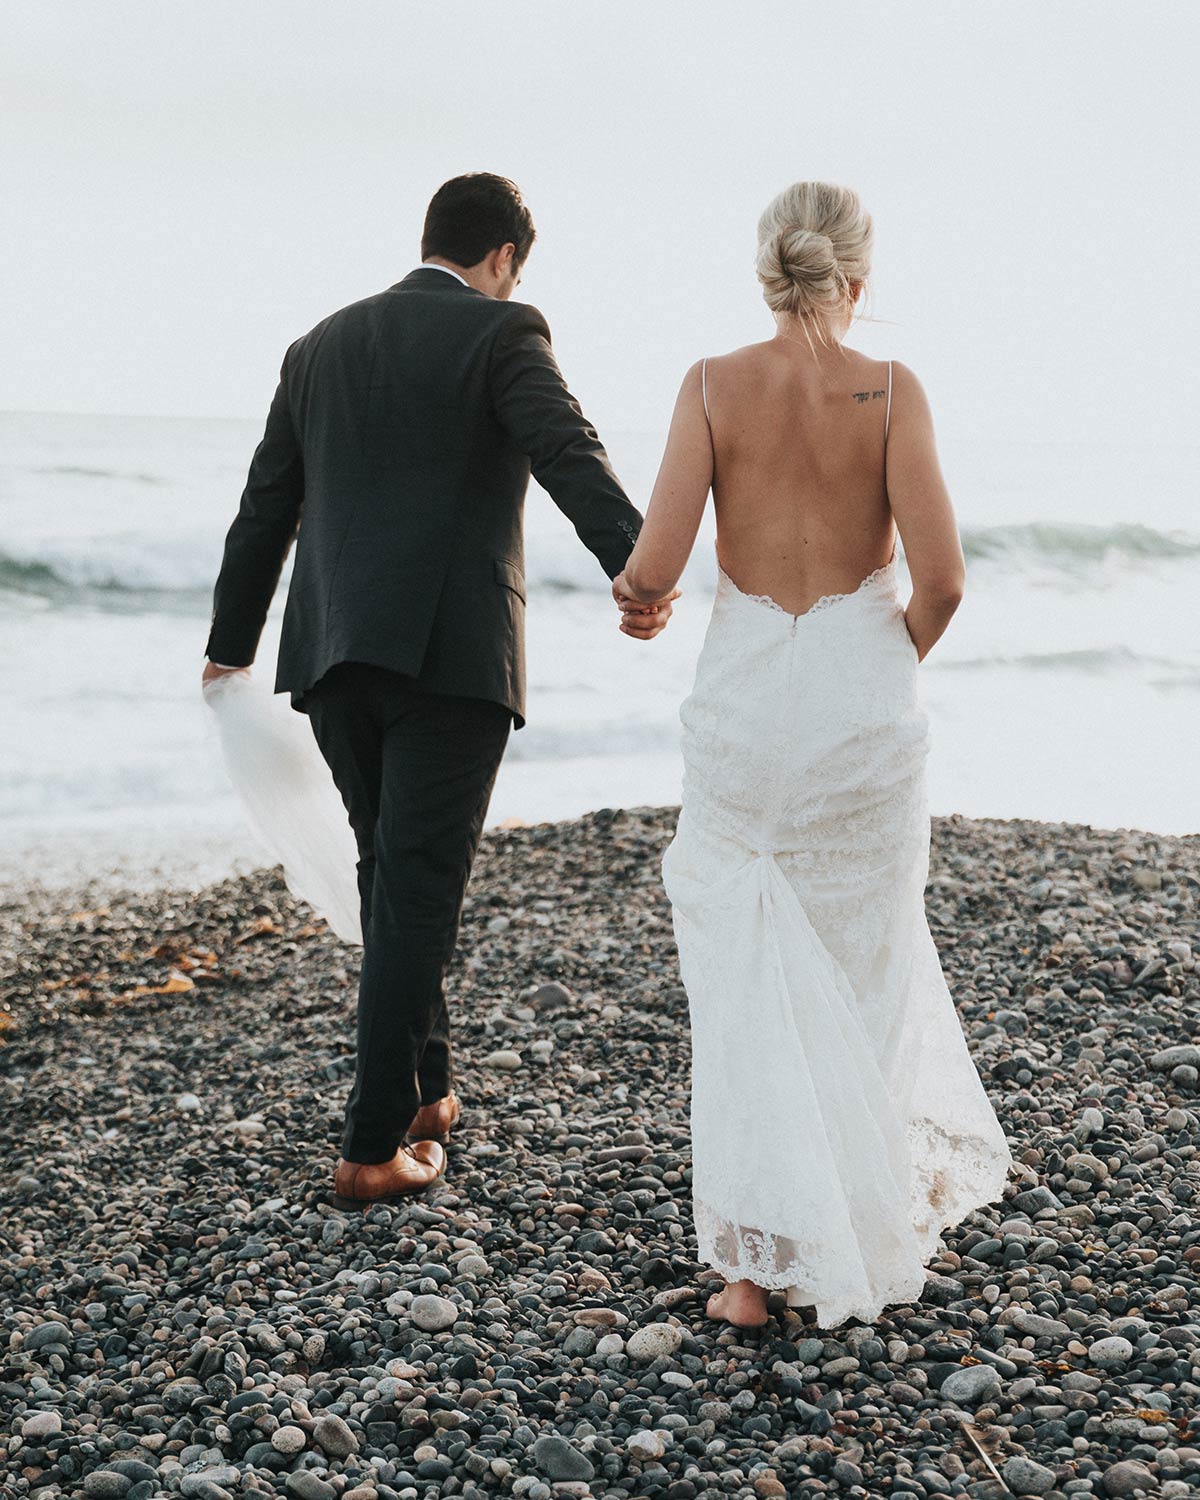 How To Have A Modern Minimalist Wedding